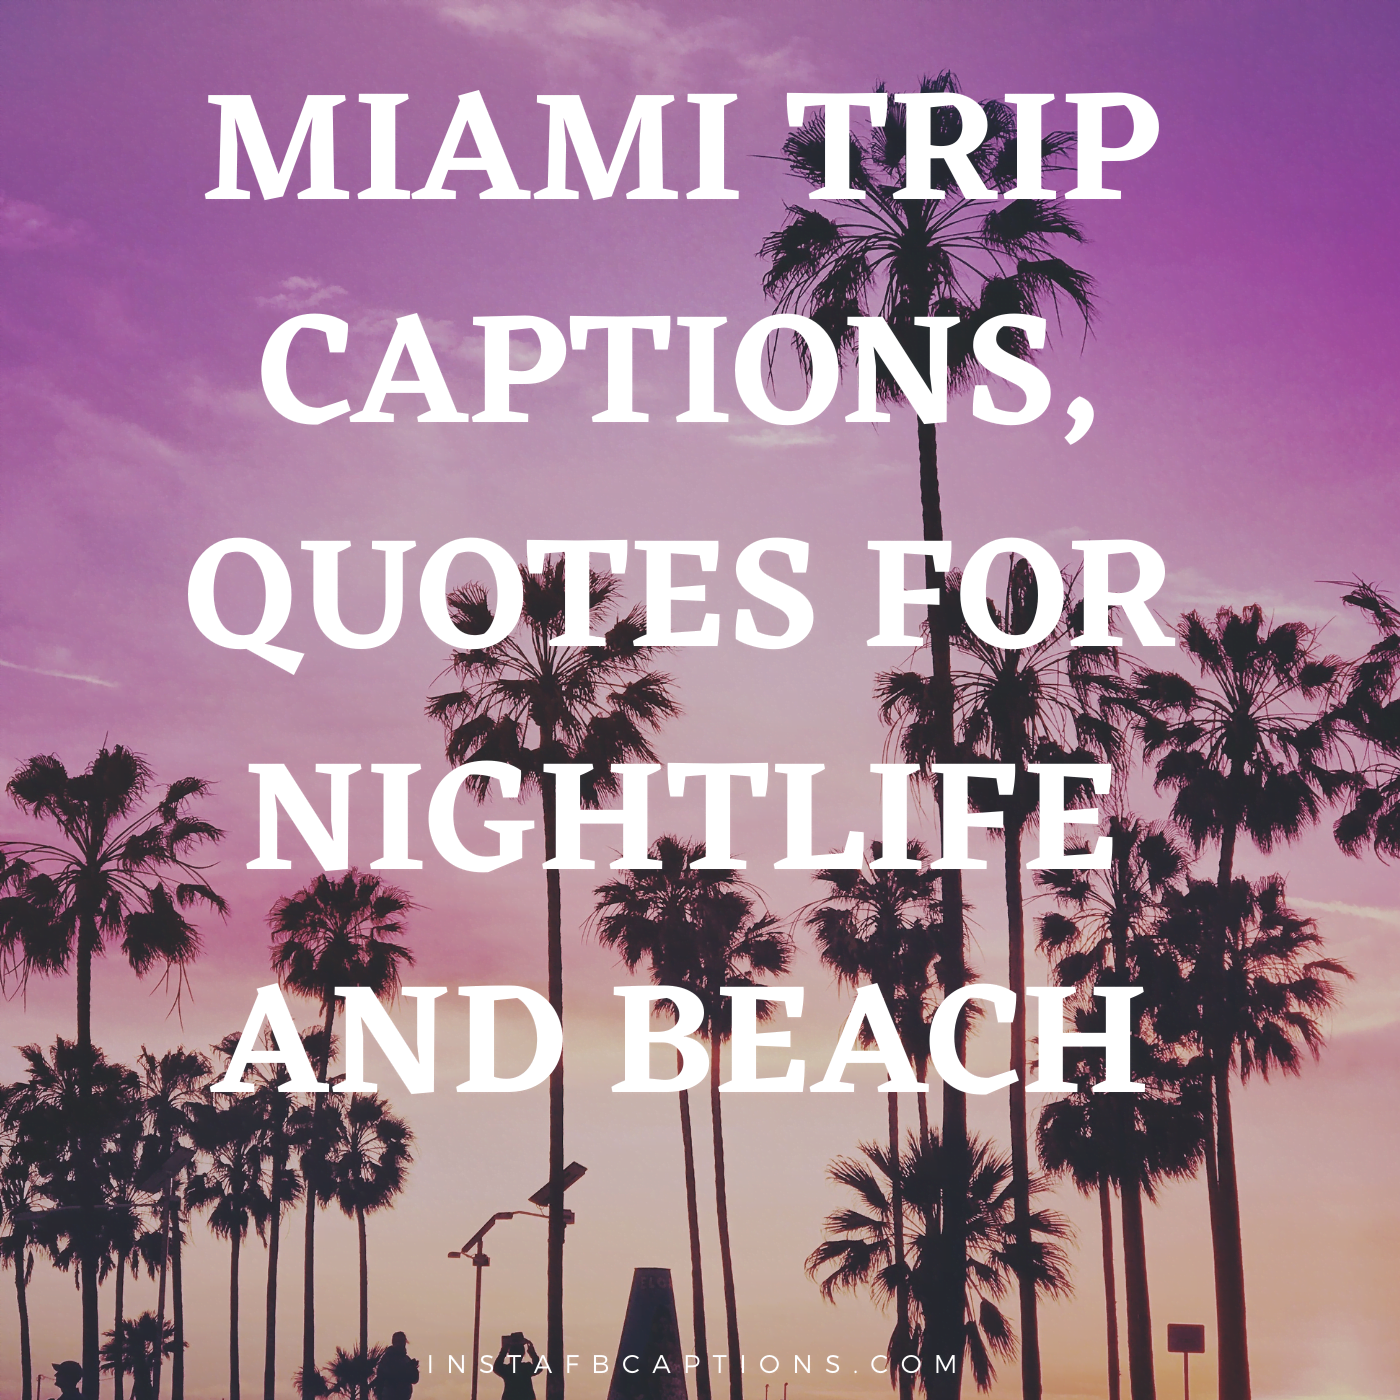 Miami Captions Quotes For Nightlife And Beach  - Miami Captions Quotes for Nightlife and Beach - 101 Miami Instagram Captions for Beach and Nightlife 2023